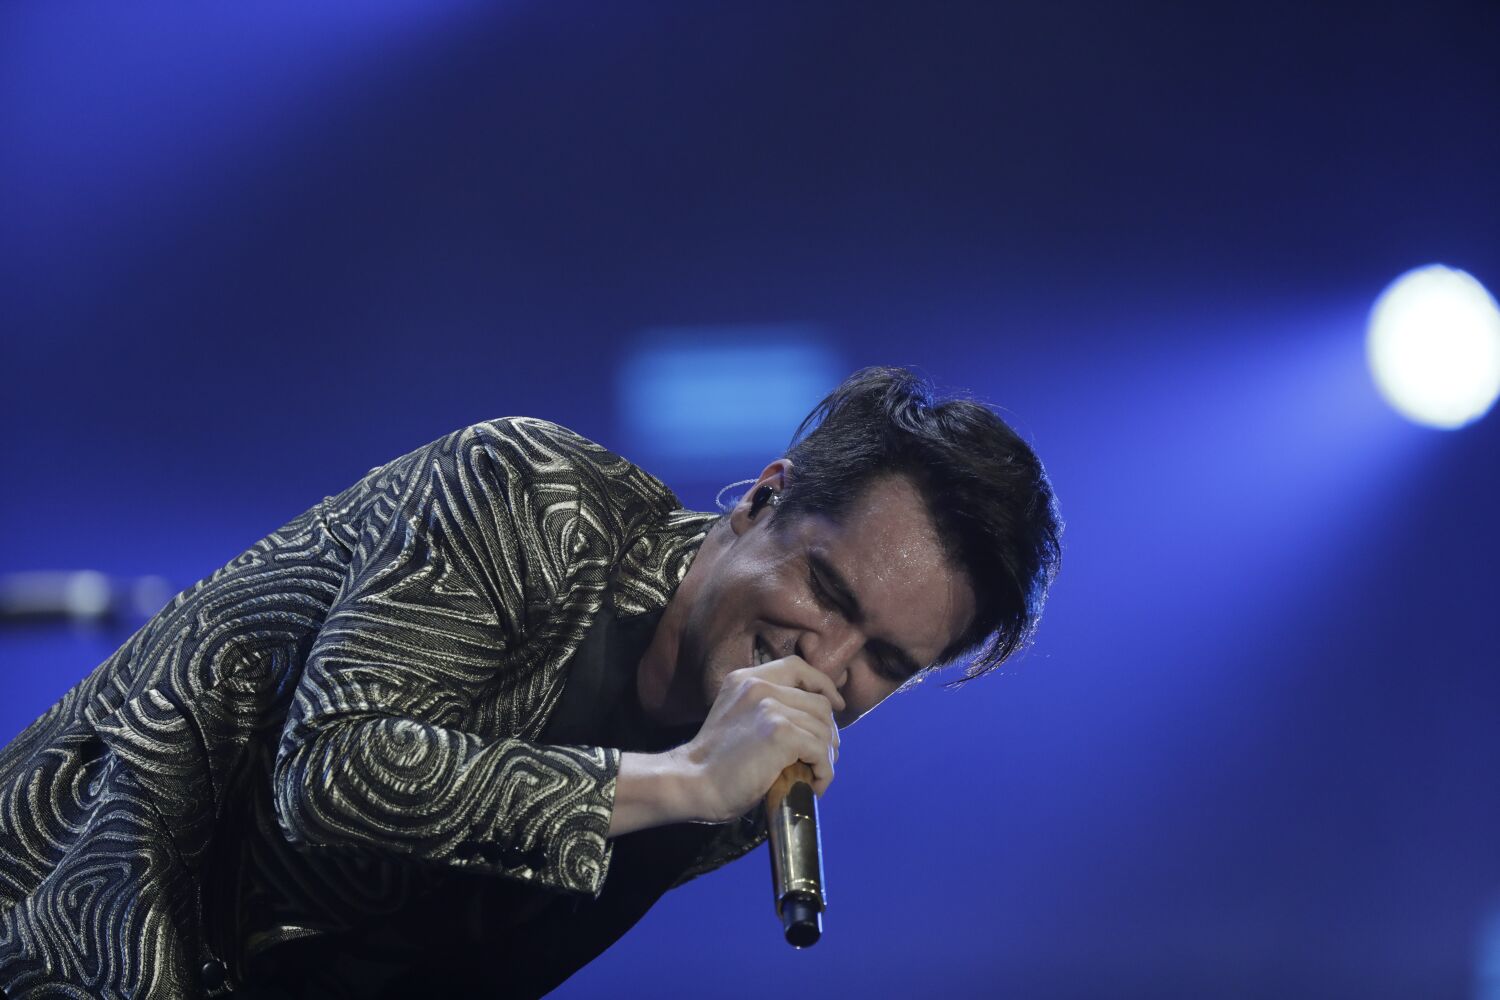 Father-to-be Brendon Urie says goodbye to Panic! at the Disco: 'A hell of a journey'